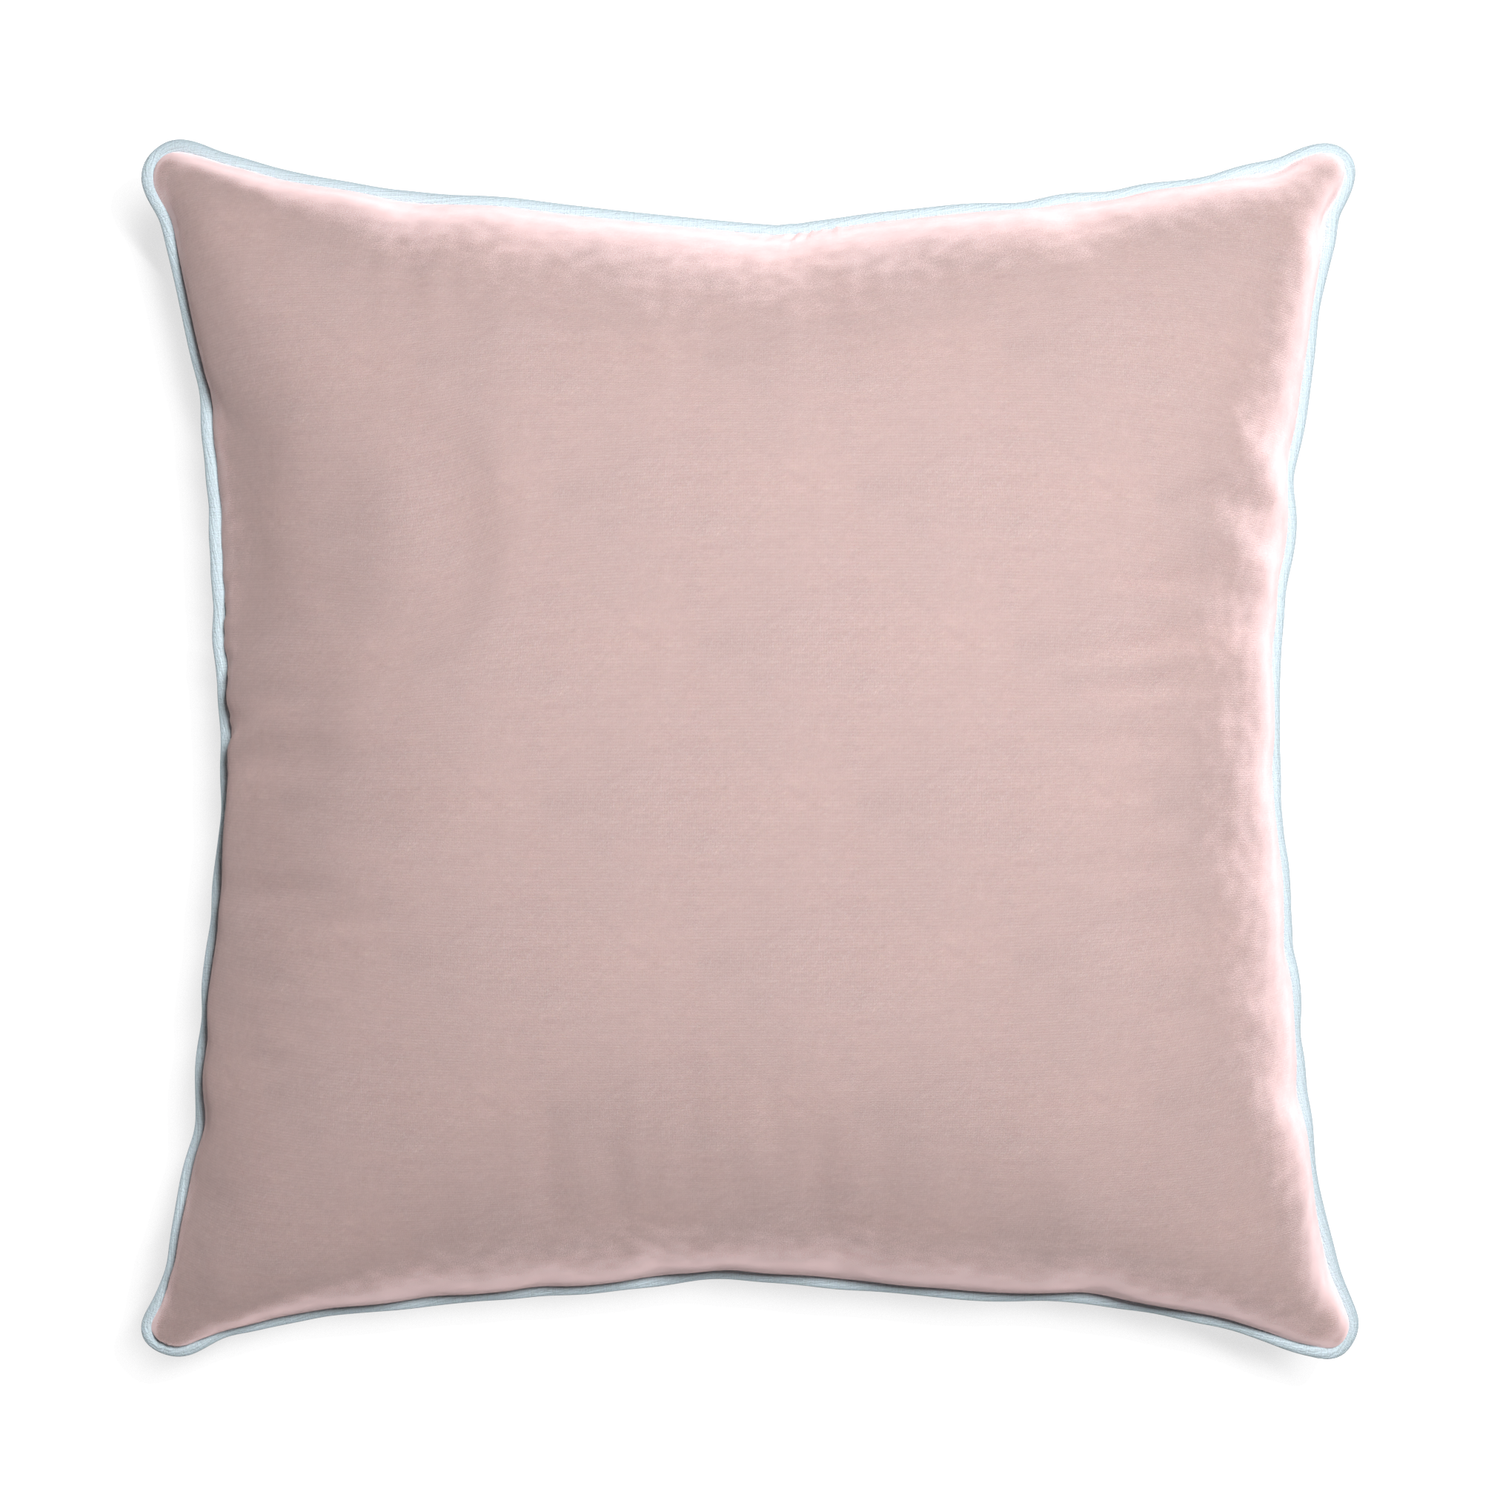 square light pink velvet pillow with light blue piping